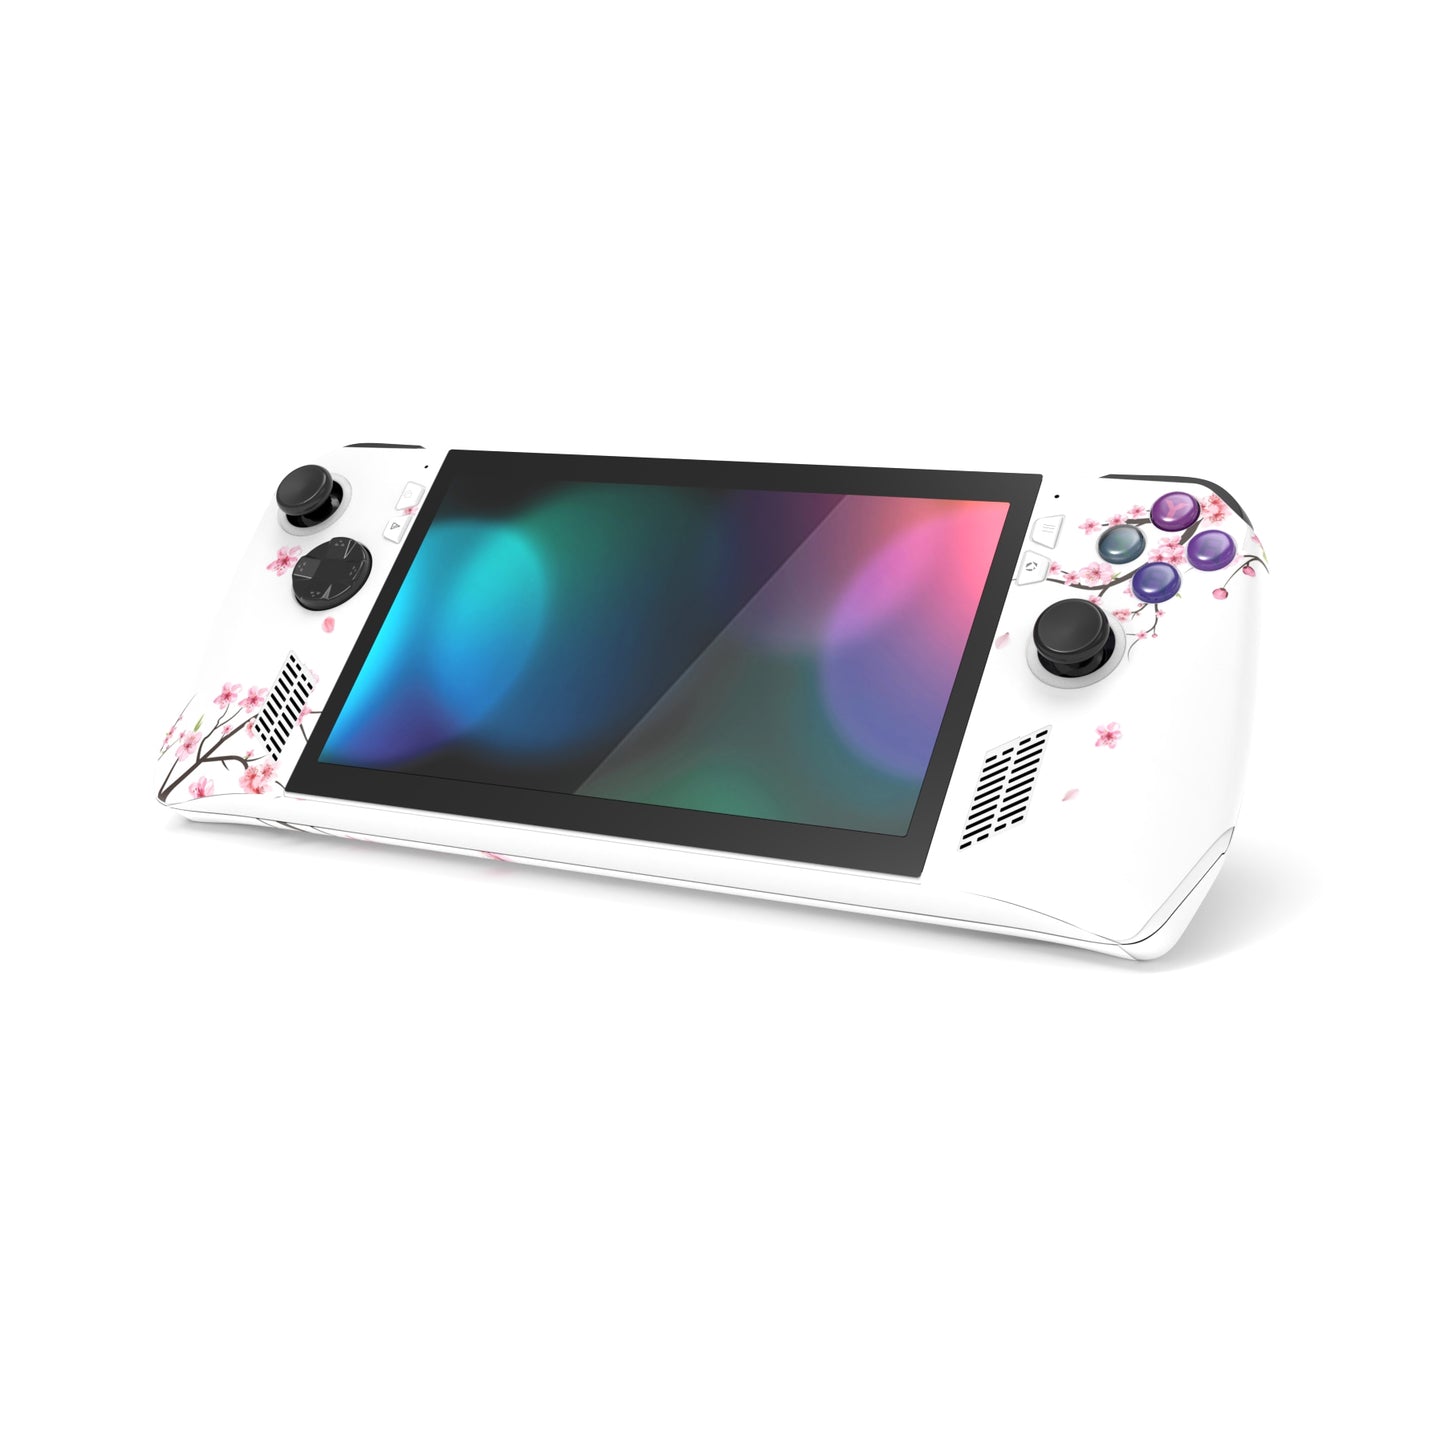 PlayVital Falling Cherry Blossom Custom Stickers Vinyl Wraps Protective Skin Decal for ROG Ally Handheld Gaming Console - RGTM010 PlayVital